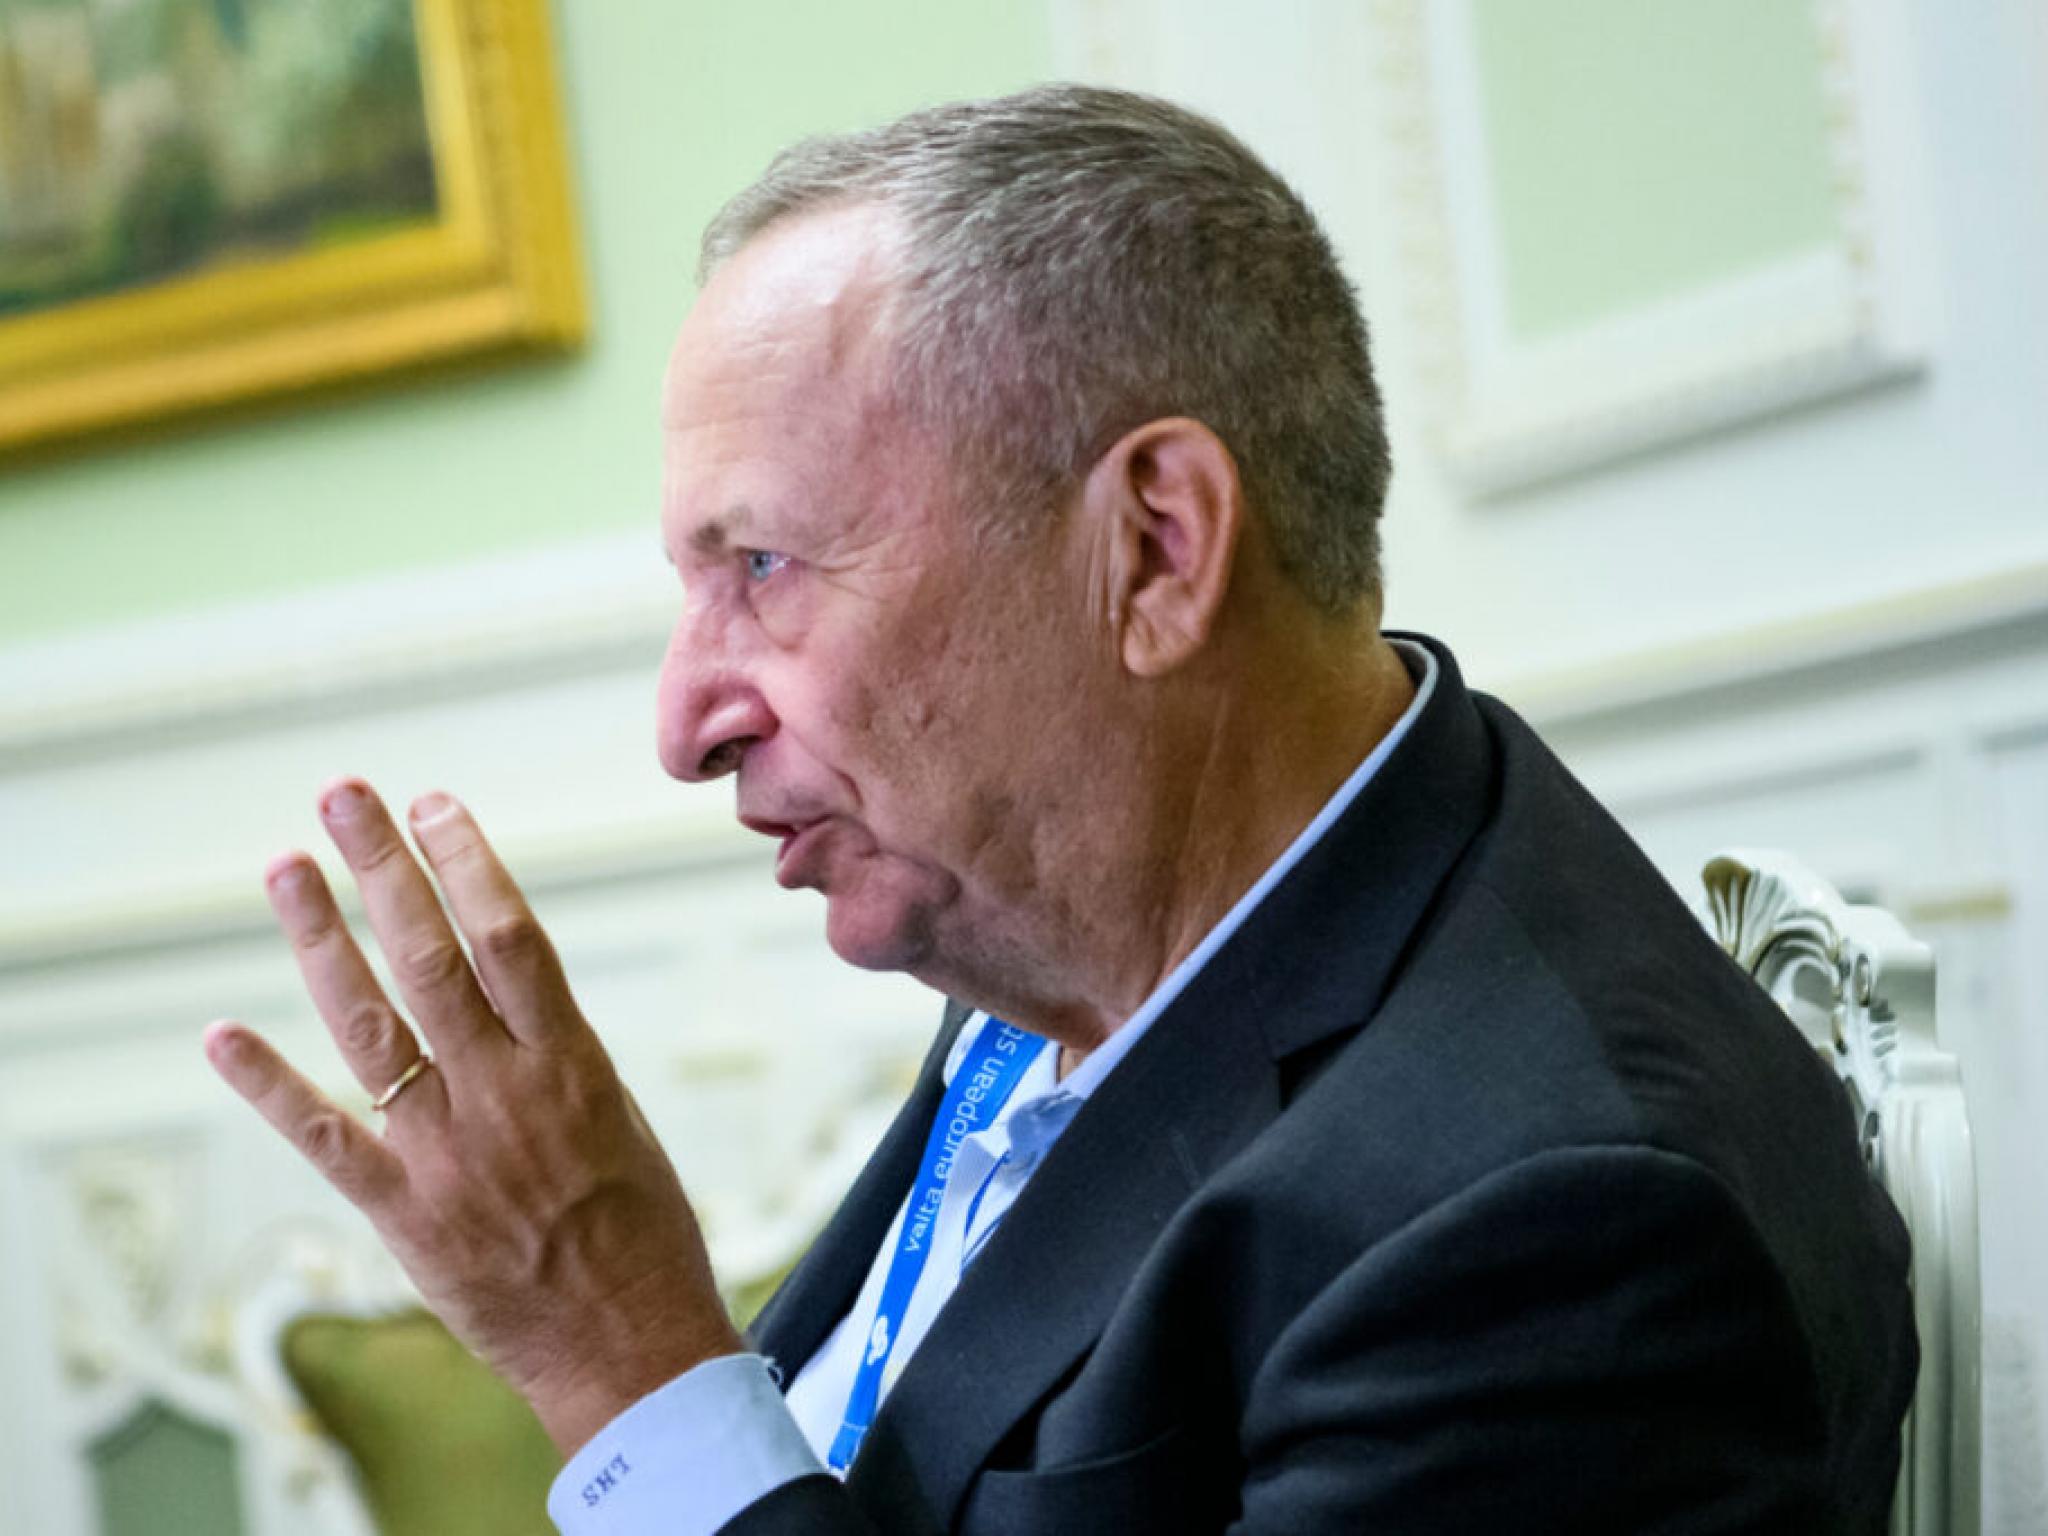  larry-summers-says-june-rate-cut-could-be-dangerous-and-egregious-error-after-hotter-than-expected-march-inflation-data 